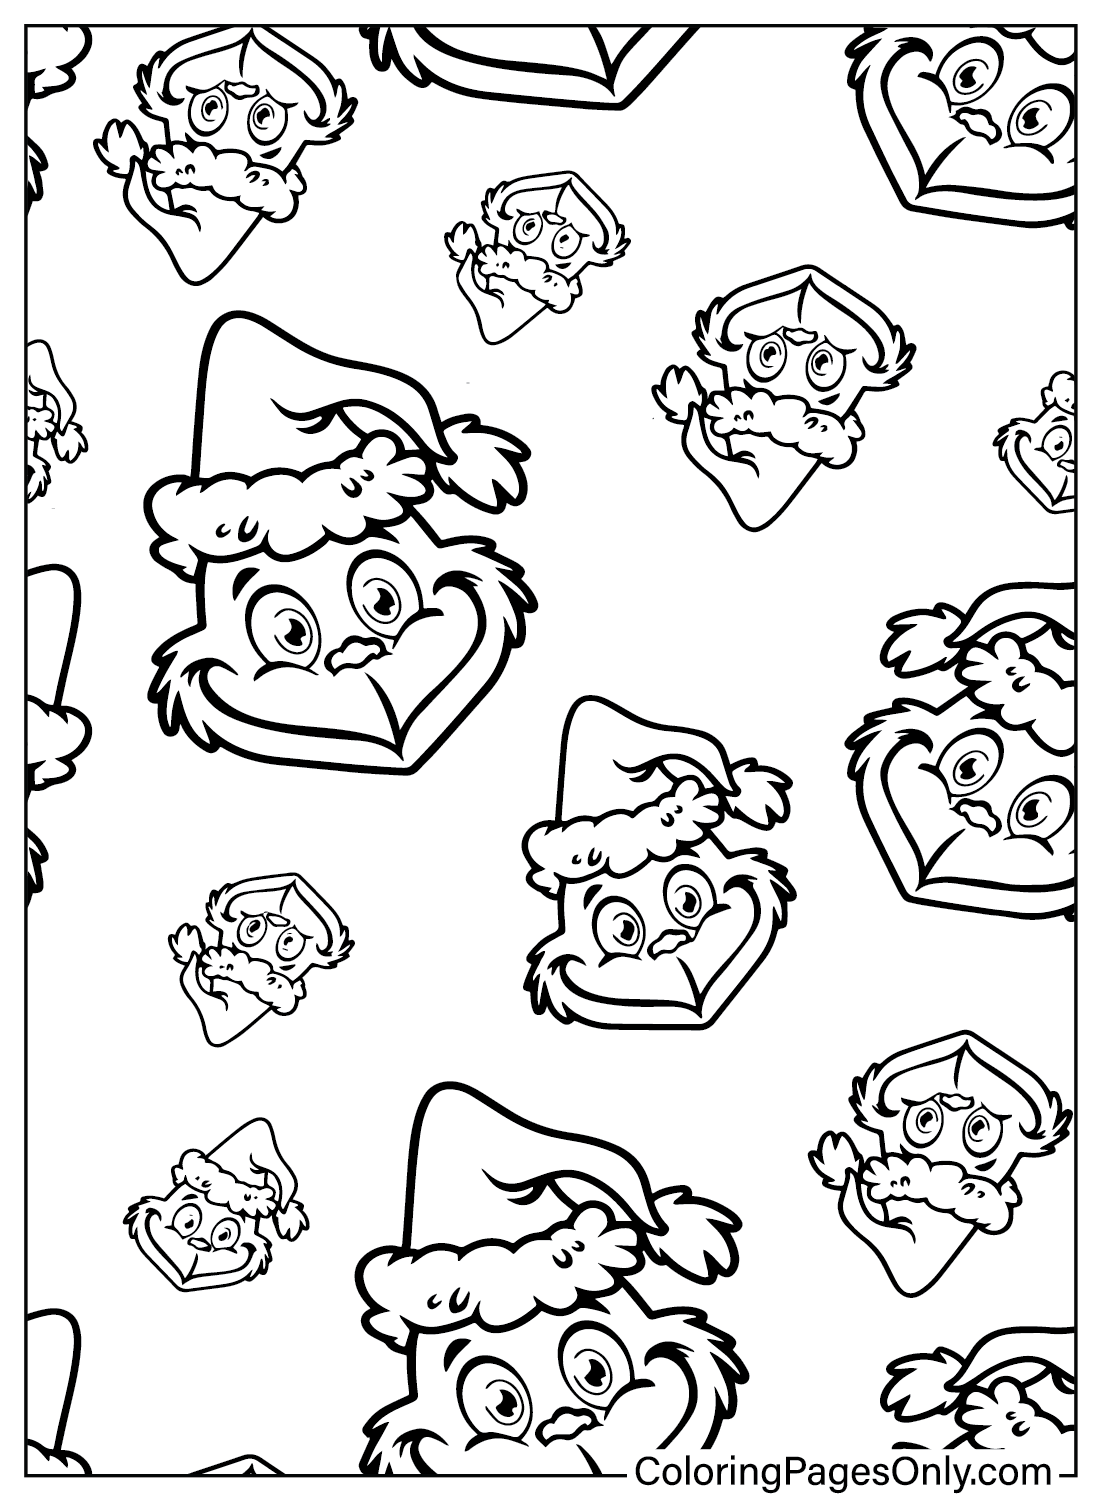 Grinch Pattern Coloring Page from Grinch